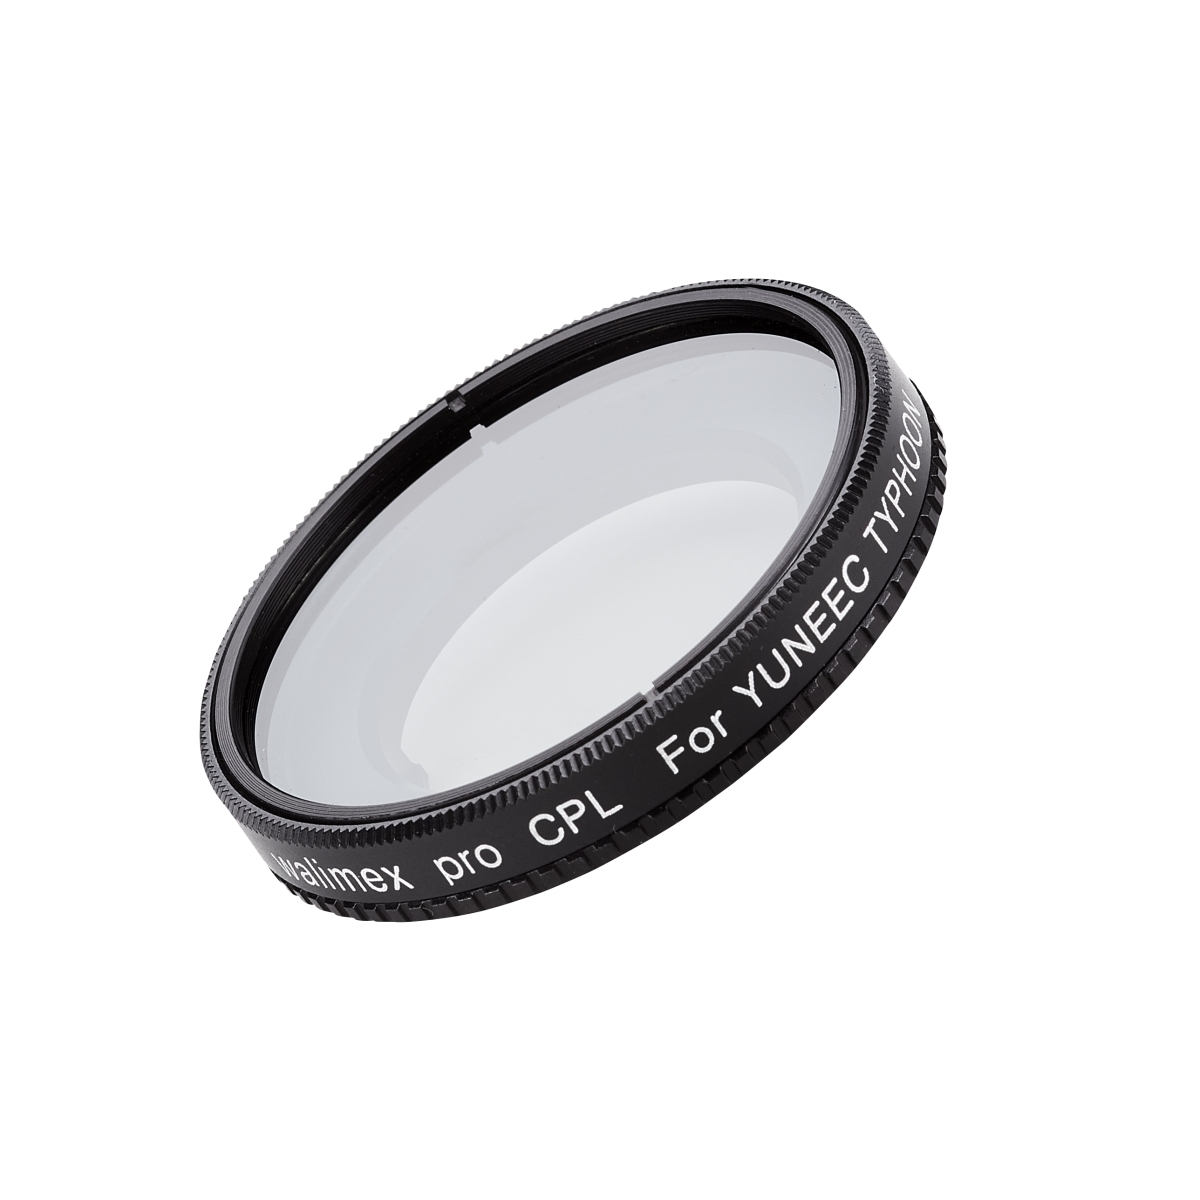 Walimex pro 3/4 CPL filter for Yuneec Typhoon